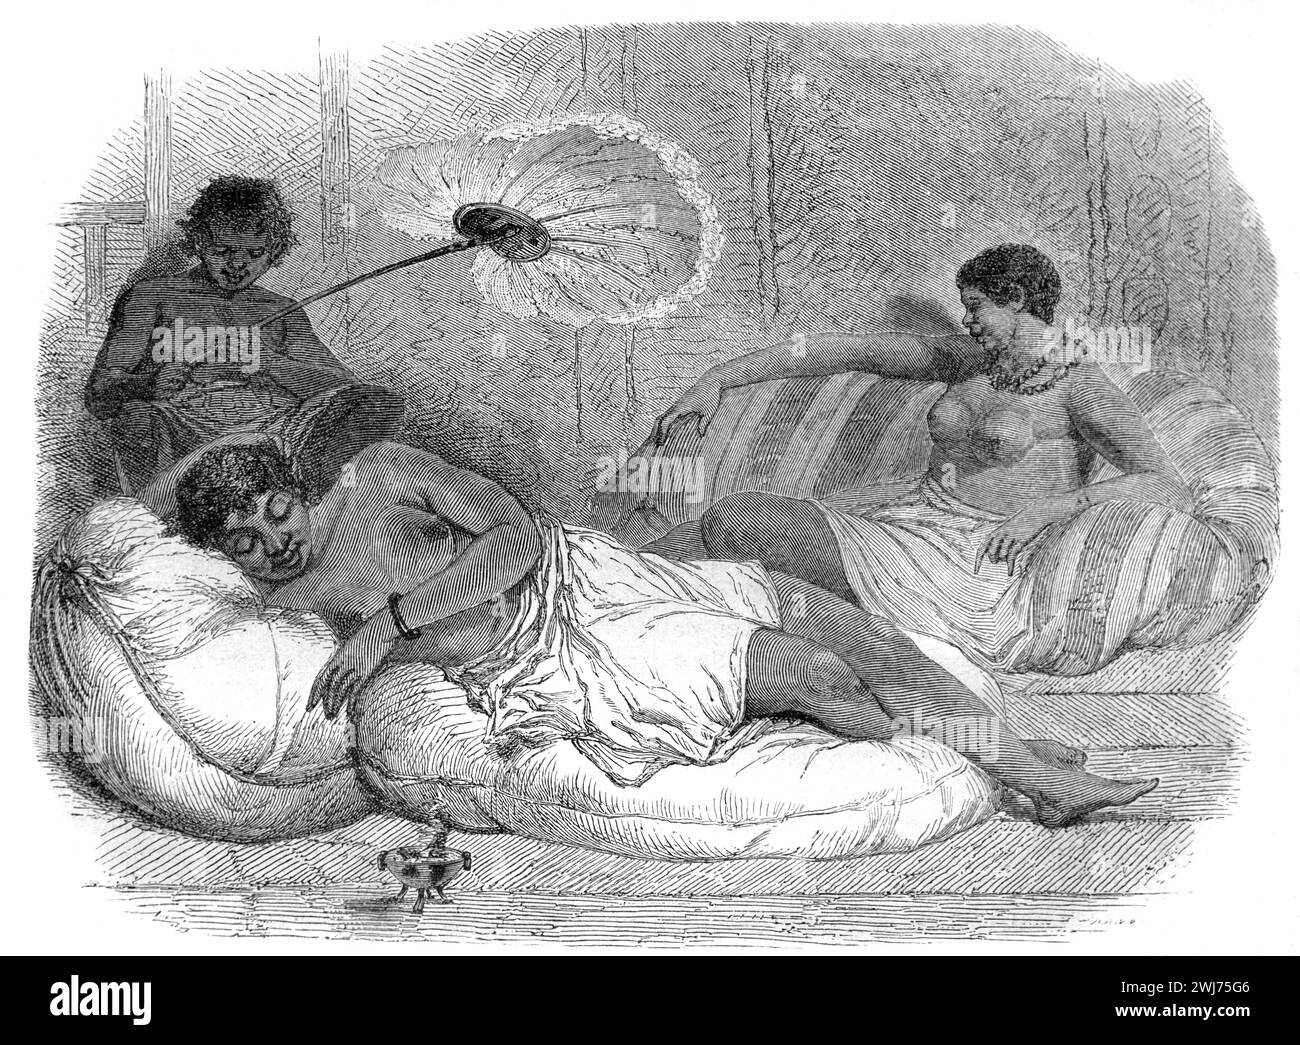 Women of the King's Harem in the Kingdom of Dahomey, now Benin, West Africa. Vintage or Historic Engraving or Illustration 1863 Stock Photo